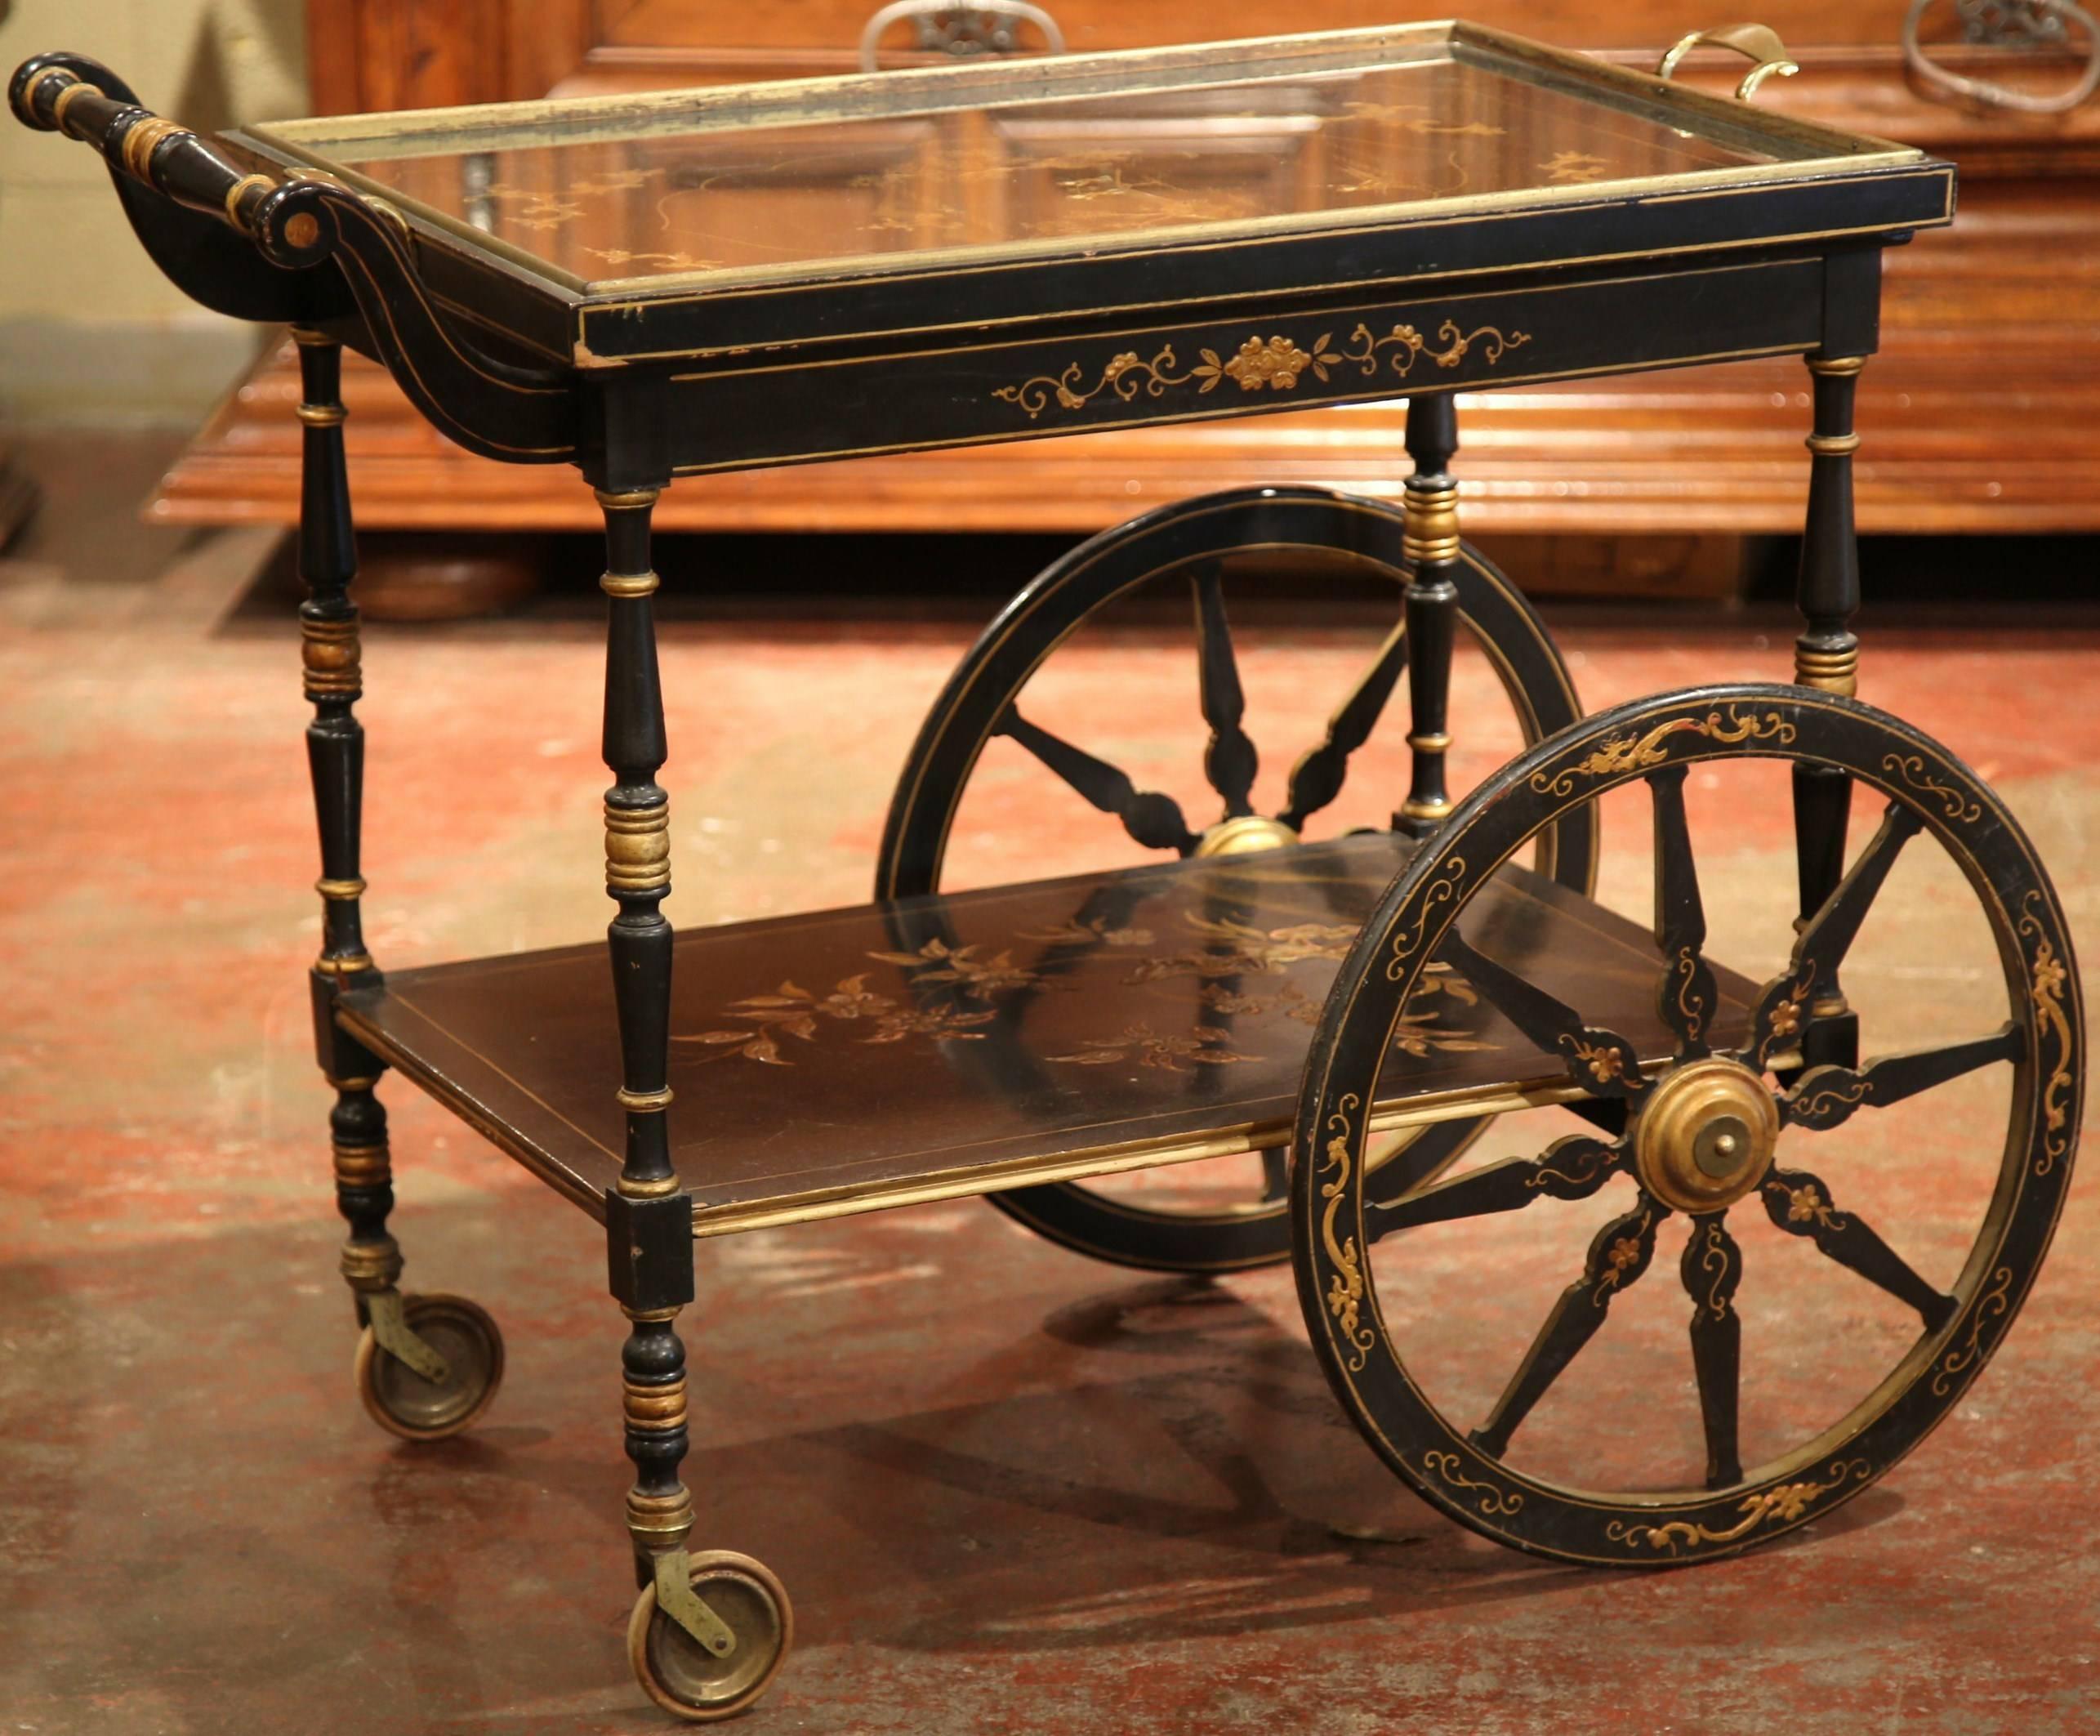 This fine wooden tea cart was created in France, circa 1920.The cart is on wheels and is painted black with chinoiserie decorative embellishments including hand-painted flowers and gilt accents. The cart features a removable glass tray with brass